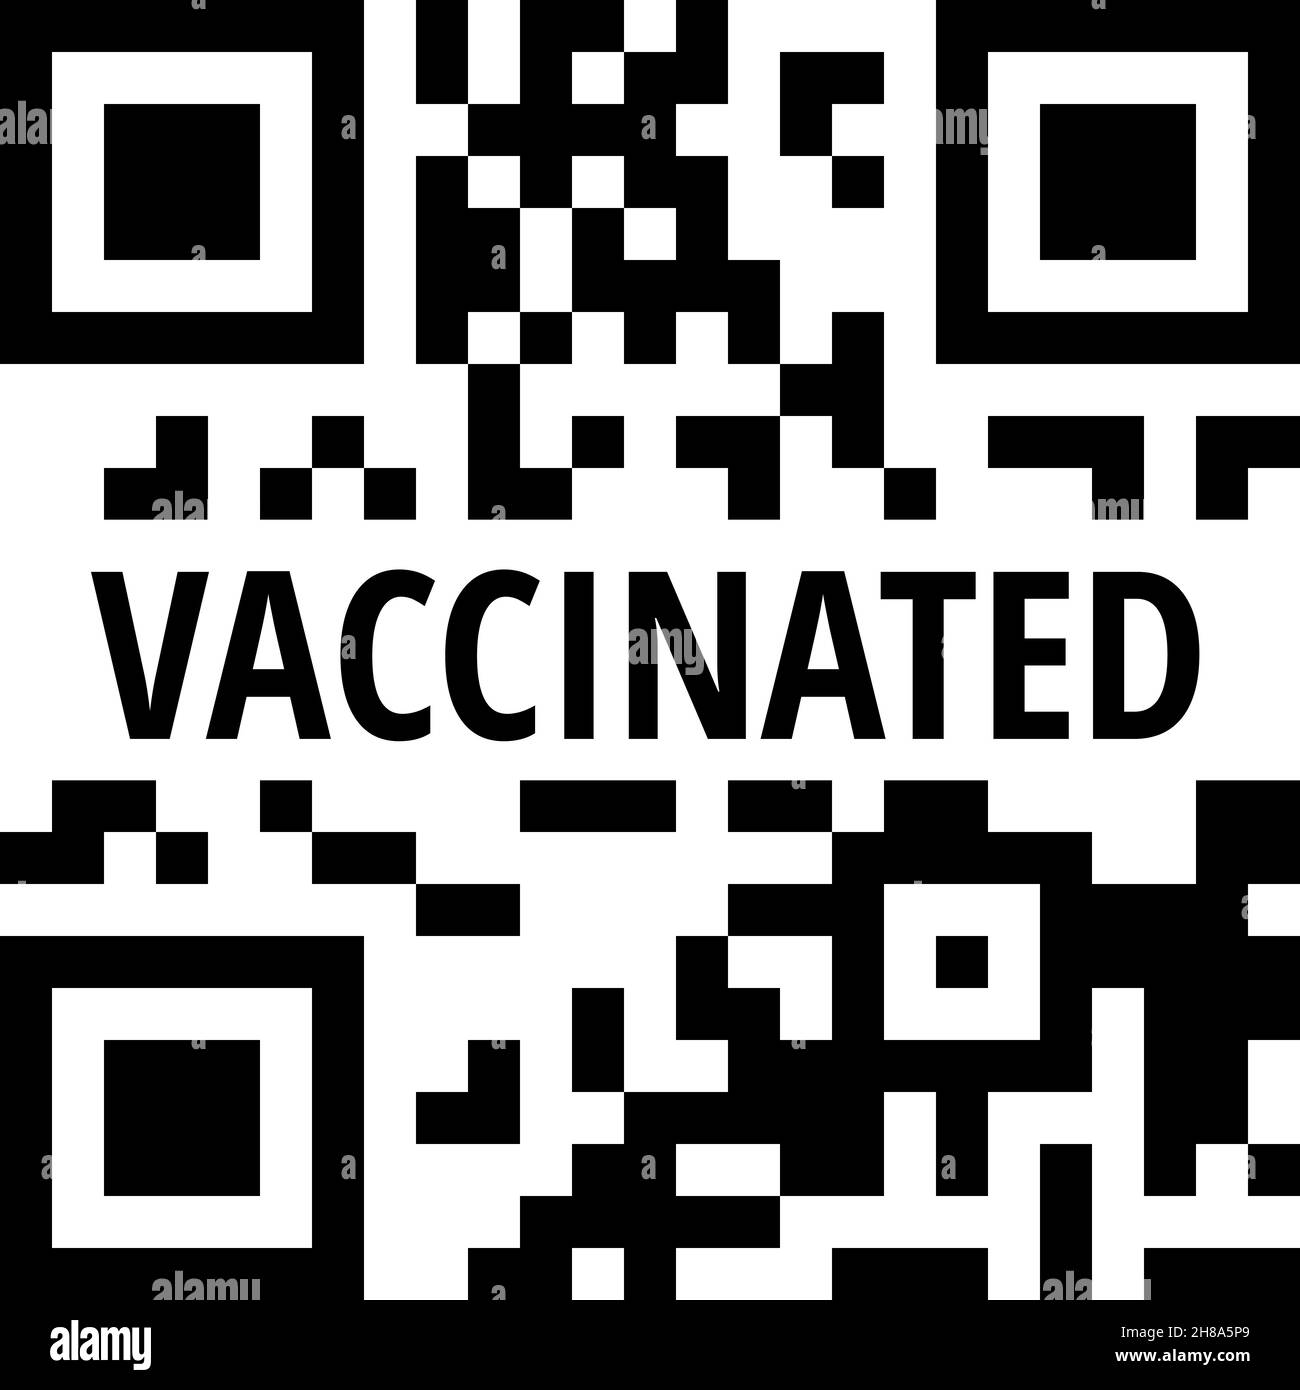 QR-code with Vaccinated text label vector illustration Stock Vector